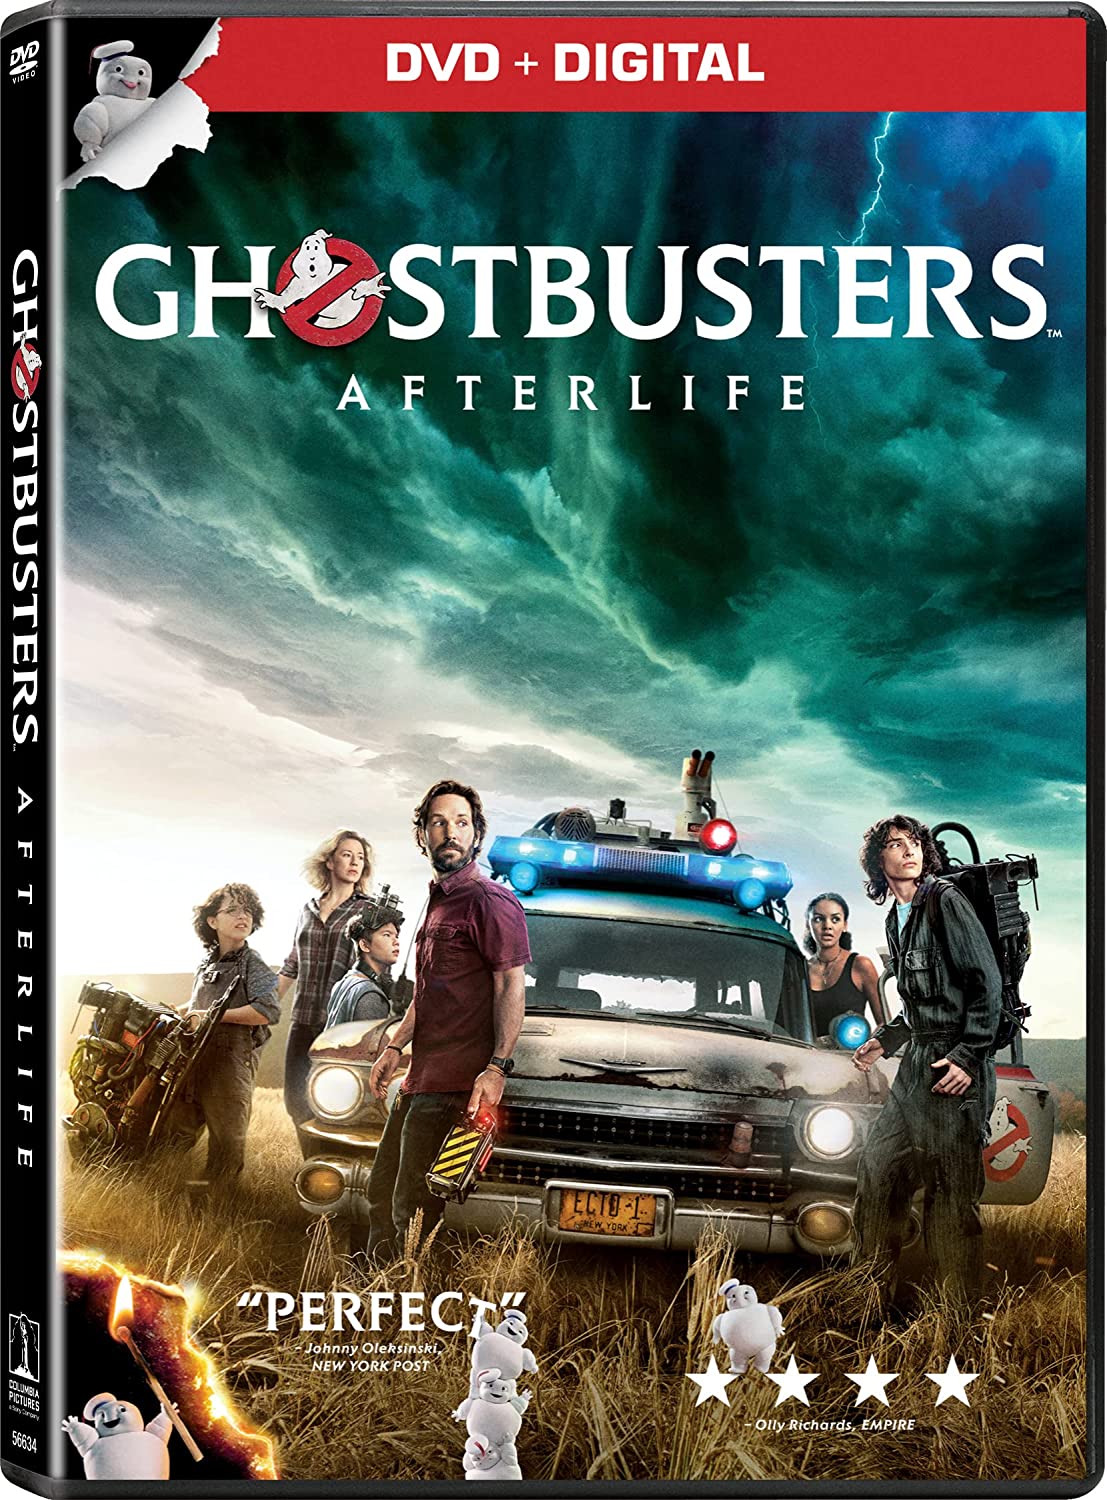 Ghostbusters Afterlife DVD